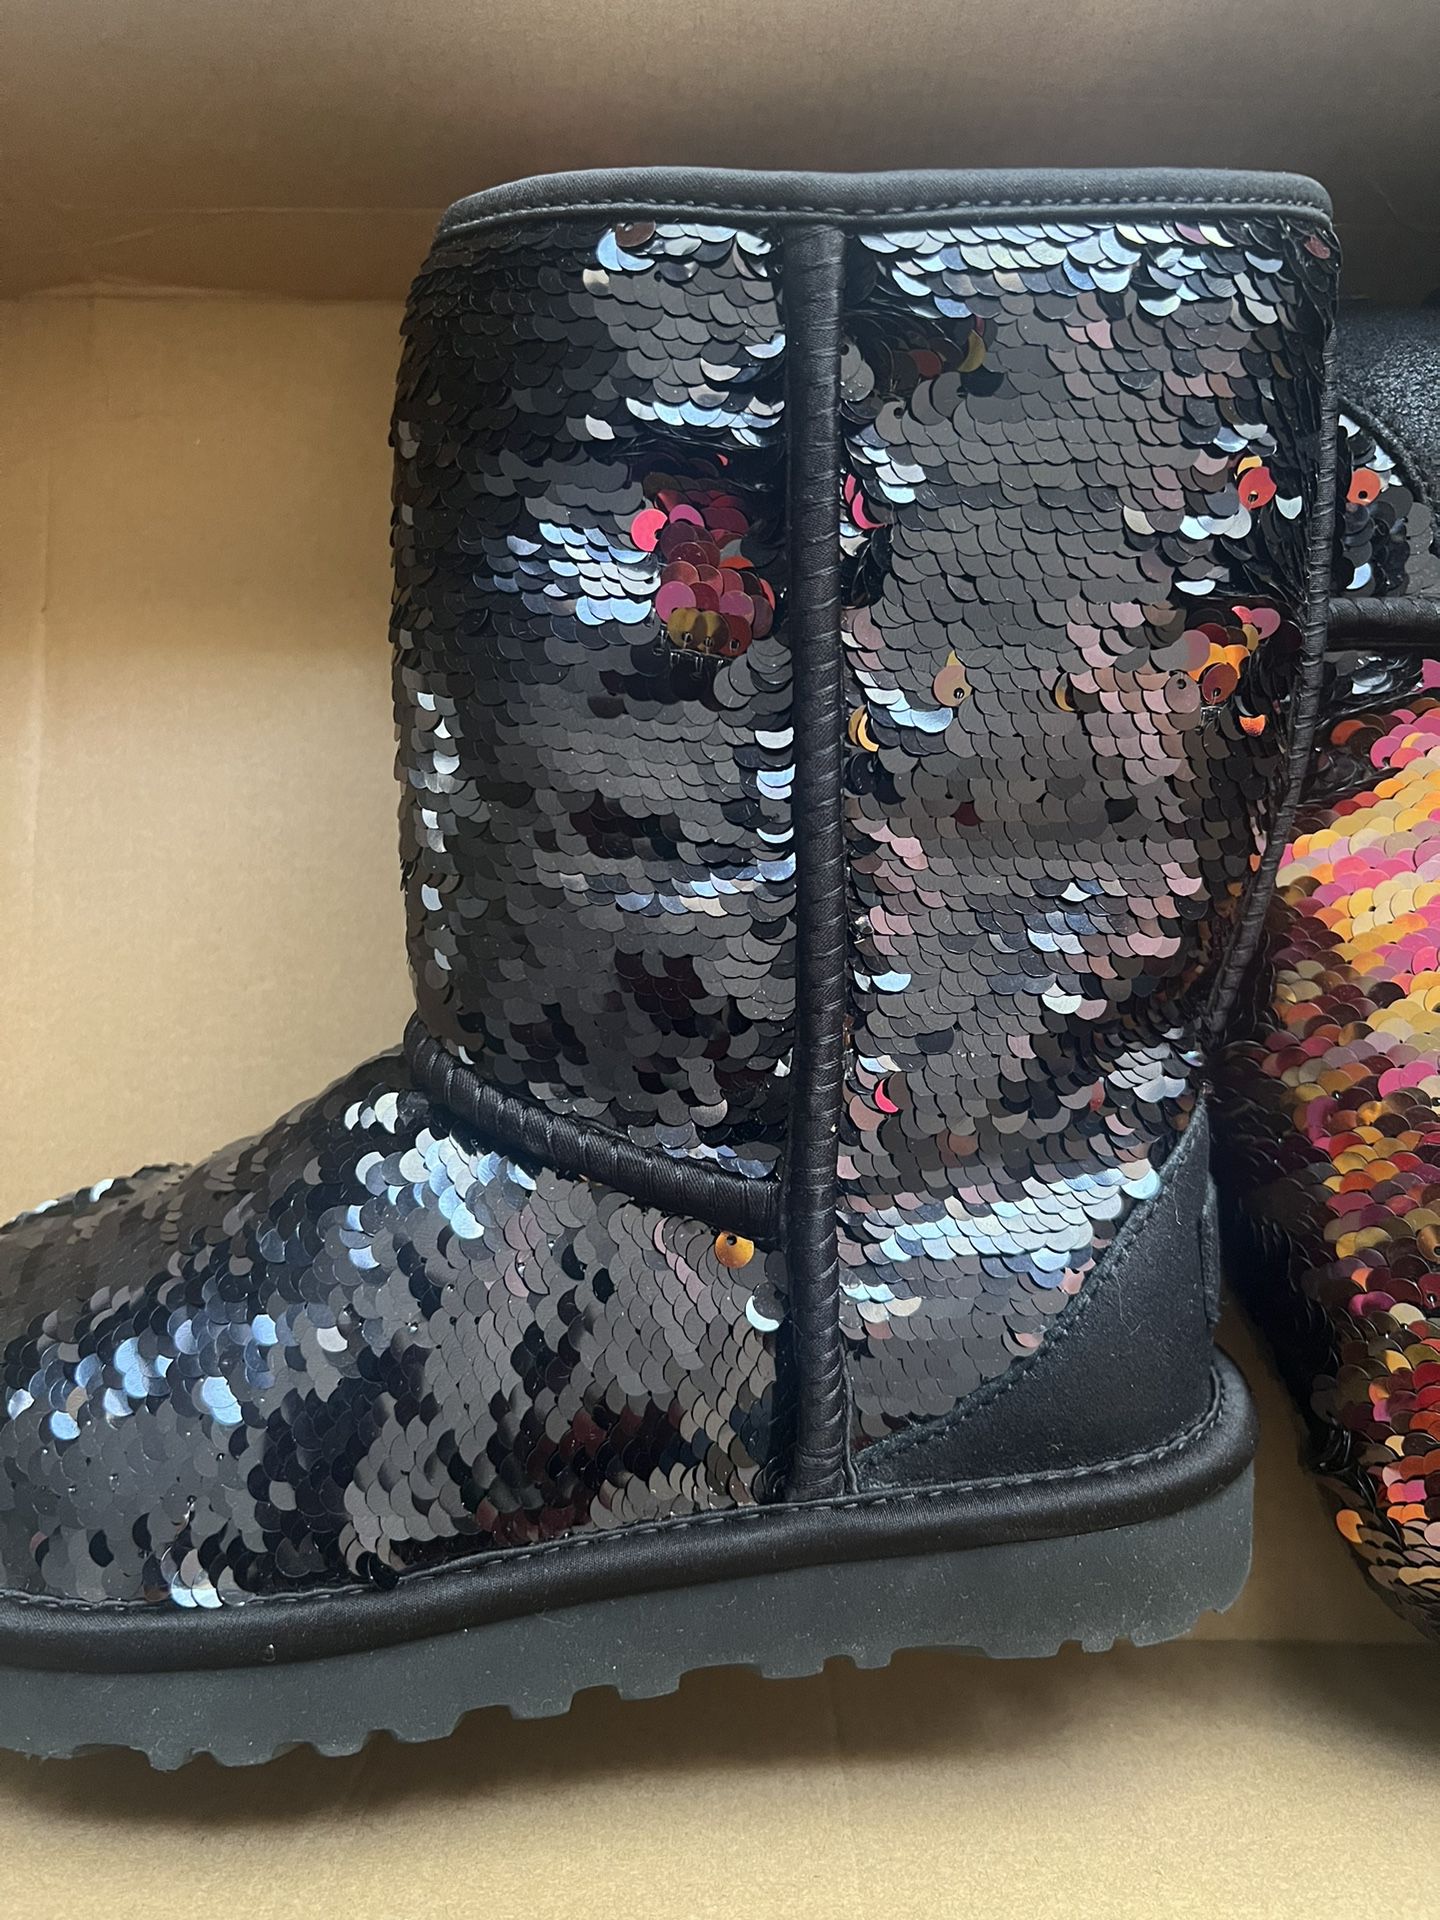 Ugg Boots For women Sequin Size 5 